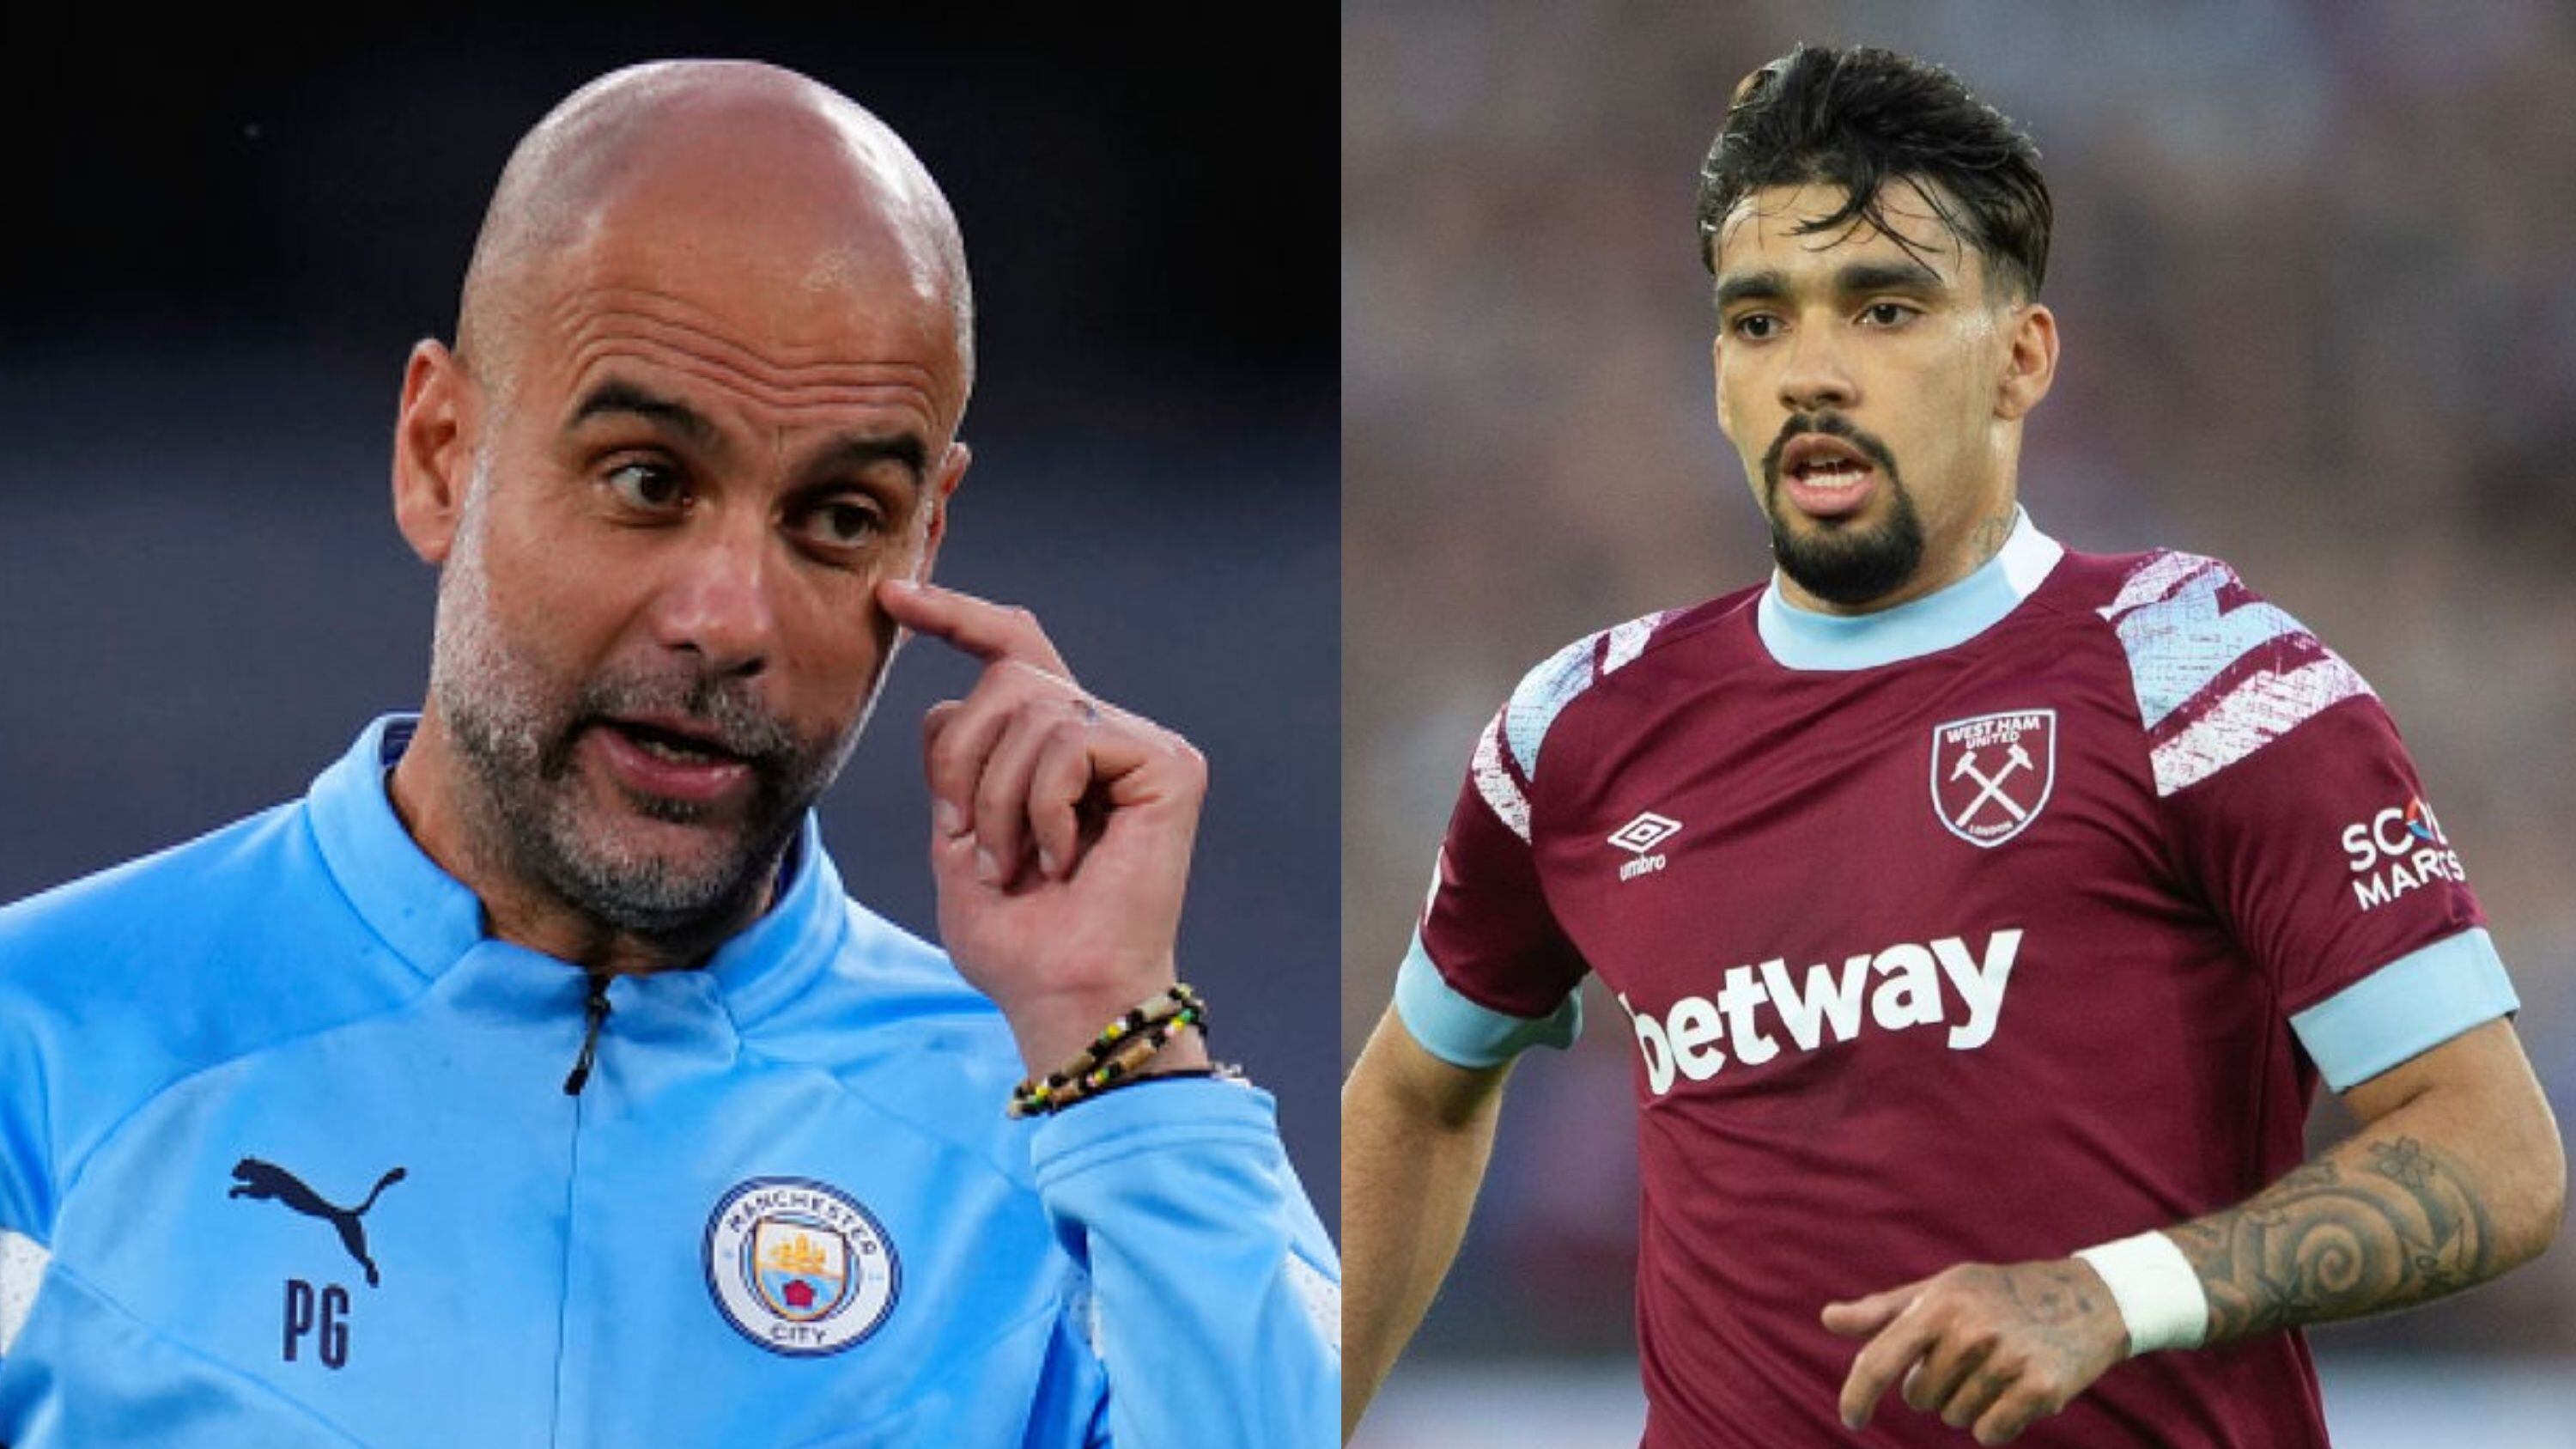 That's why Manchester City wants him, this is what Lucas Paqueta did with West Ham